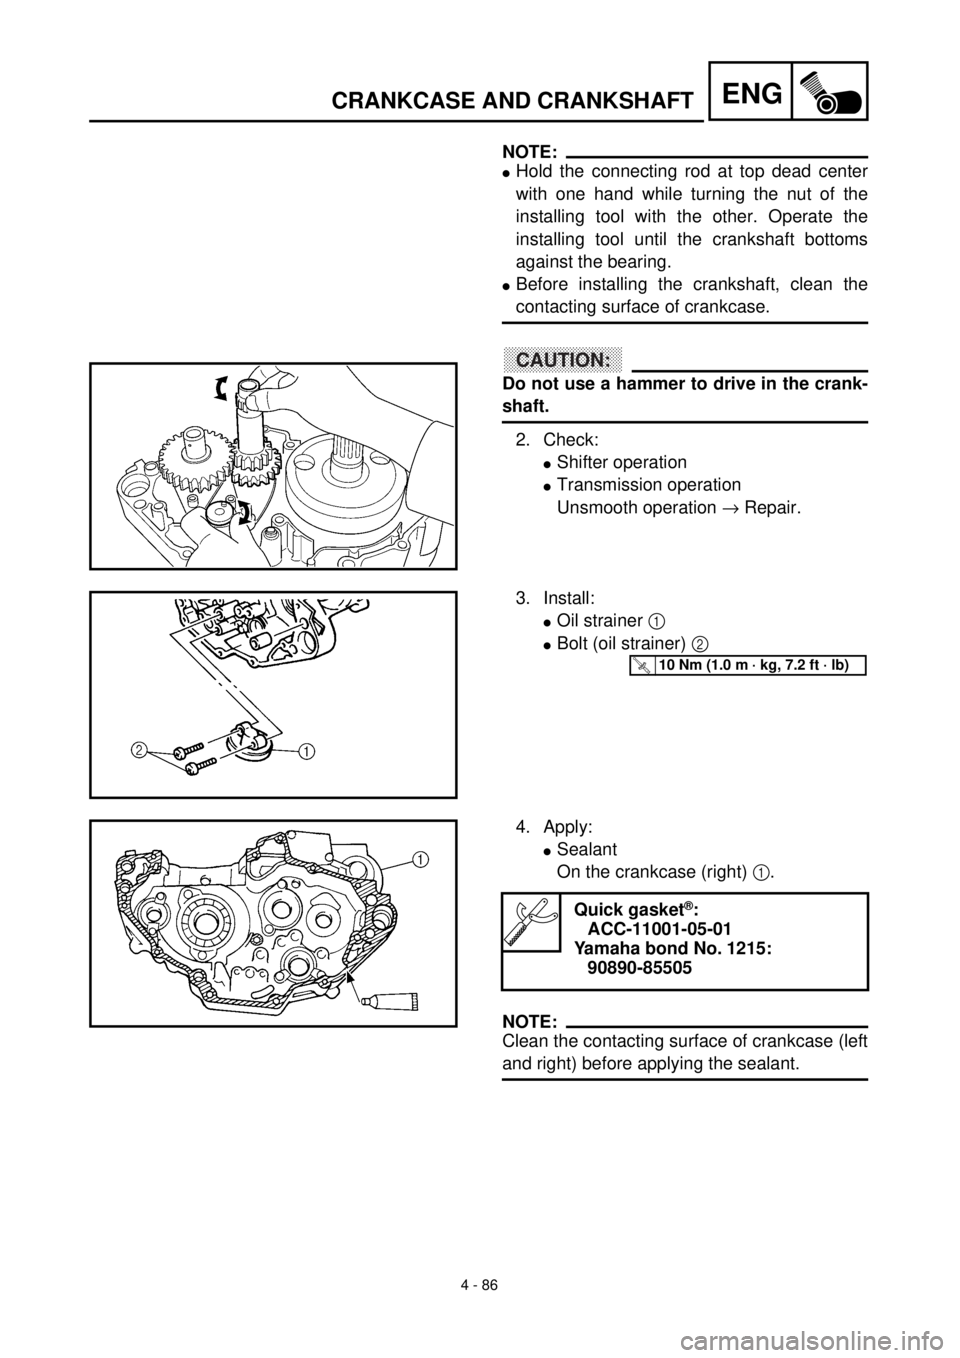 YAMAHA WR 400F 2000  Notices Demploi (in French) 4 - 86
ENGCRANKCASE AND CRANKSHAFT
NOTE:
lHold the connecting rod at top dead center
with one hand while turning the nut of the
installing tool with the other. Operate the
installing tool until the cr